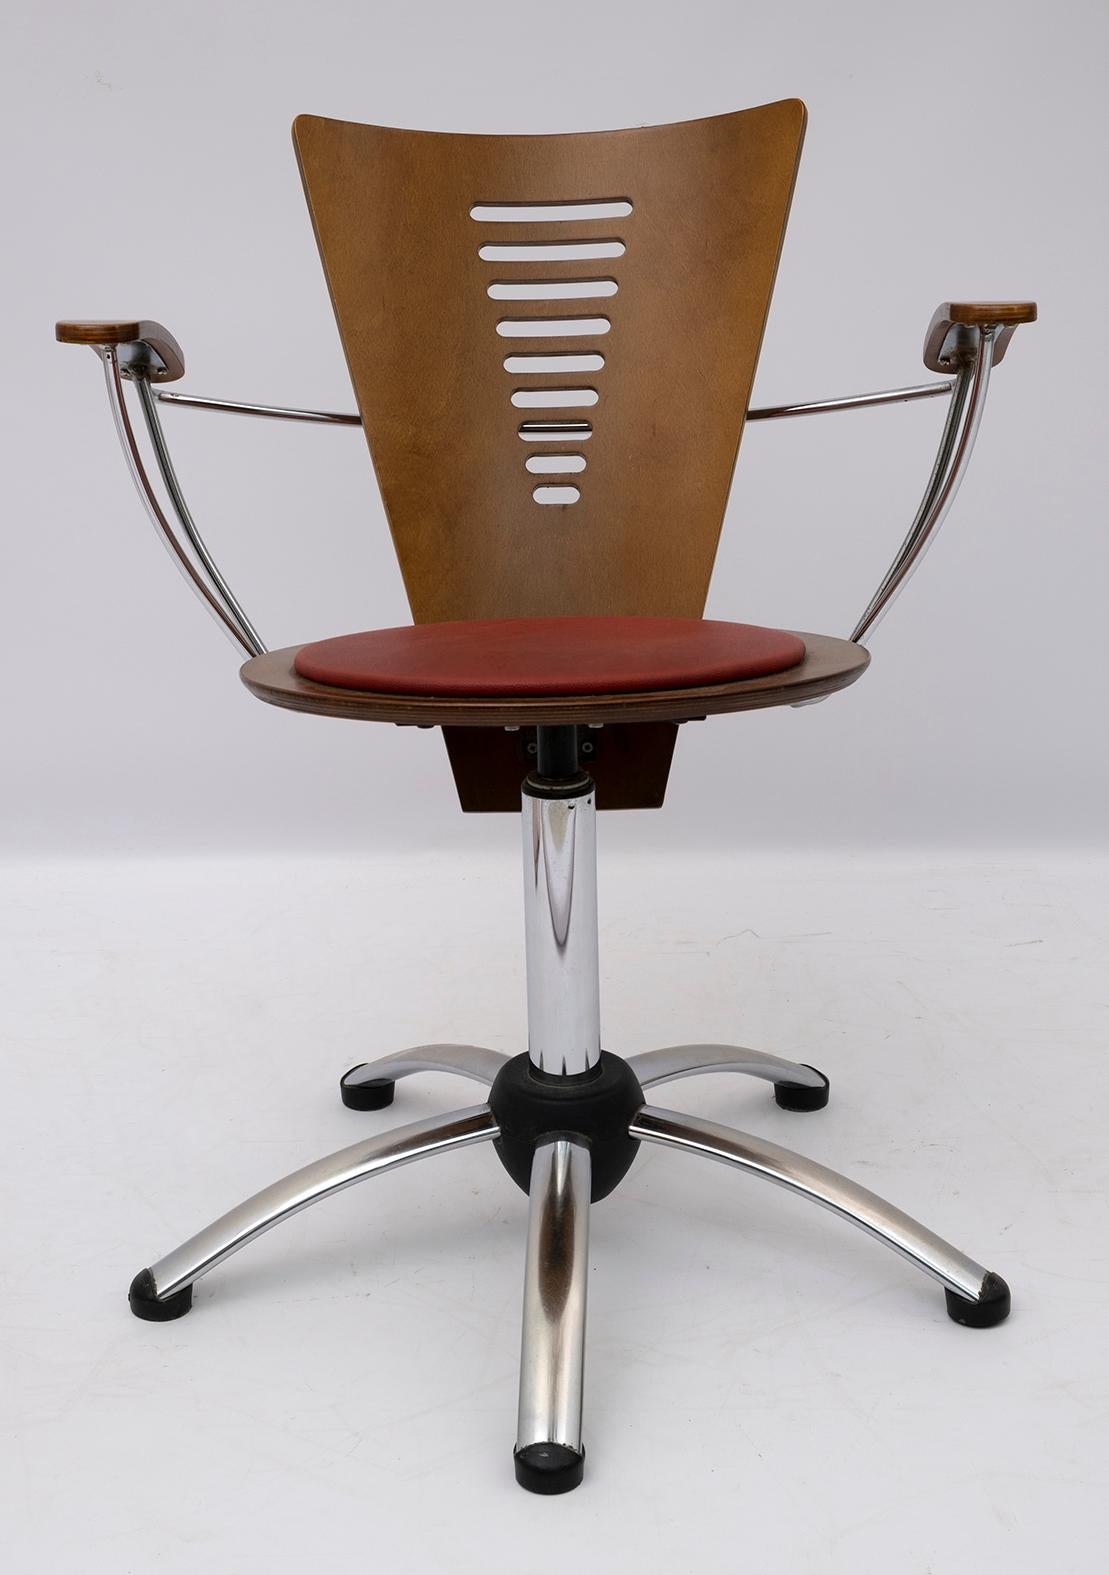 Four postmodern style swivel chairs in curved plywood and chromed metal, covered in eco-leather.